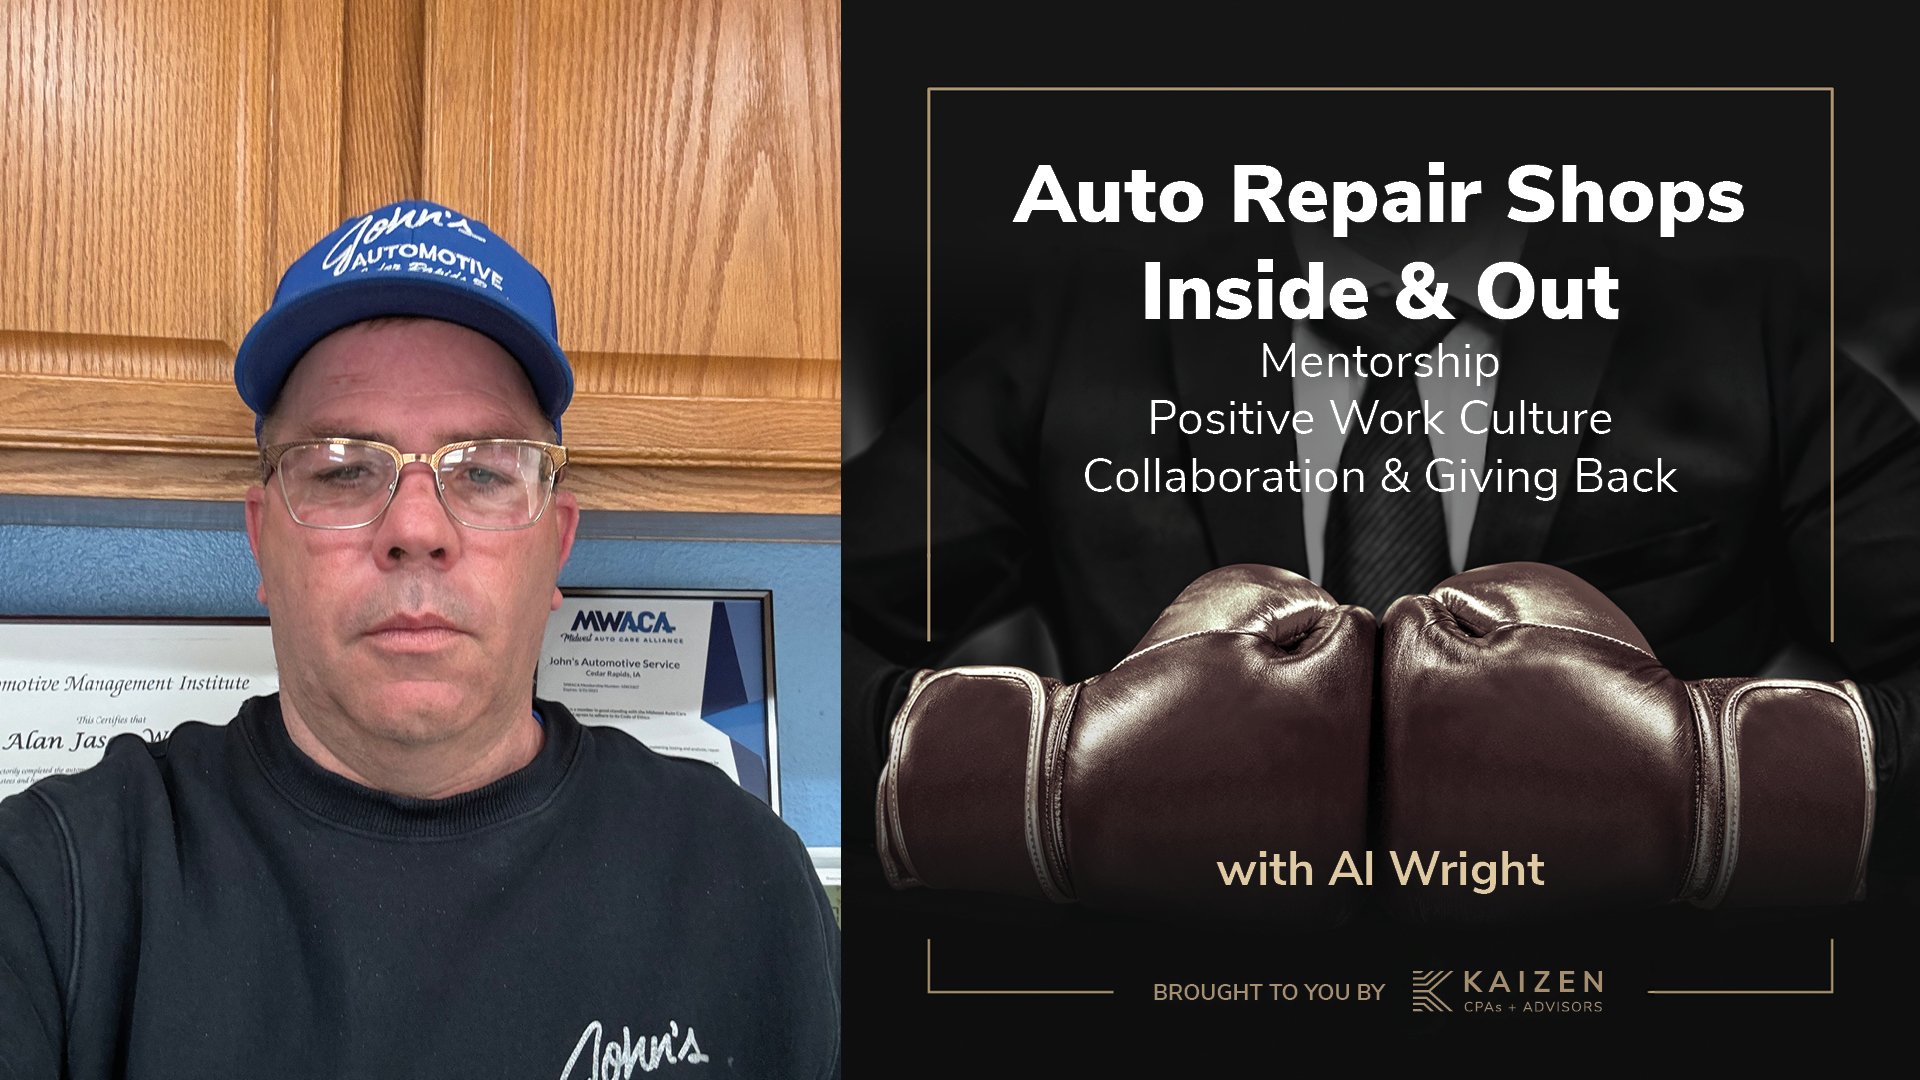 Al Wright shares his journey in the automotive industry, from gas station attendant to shop owner.